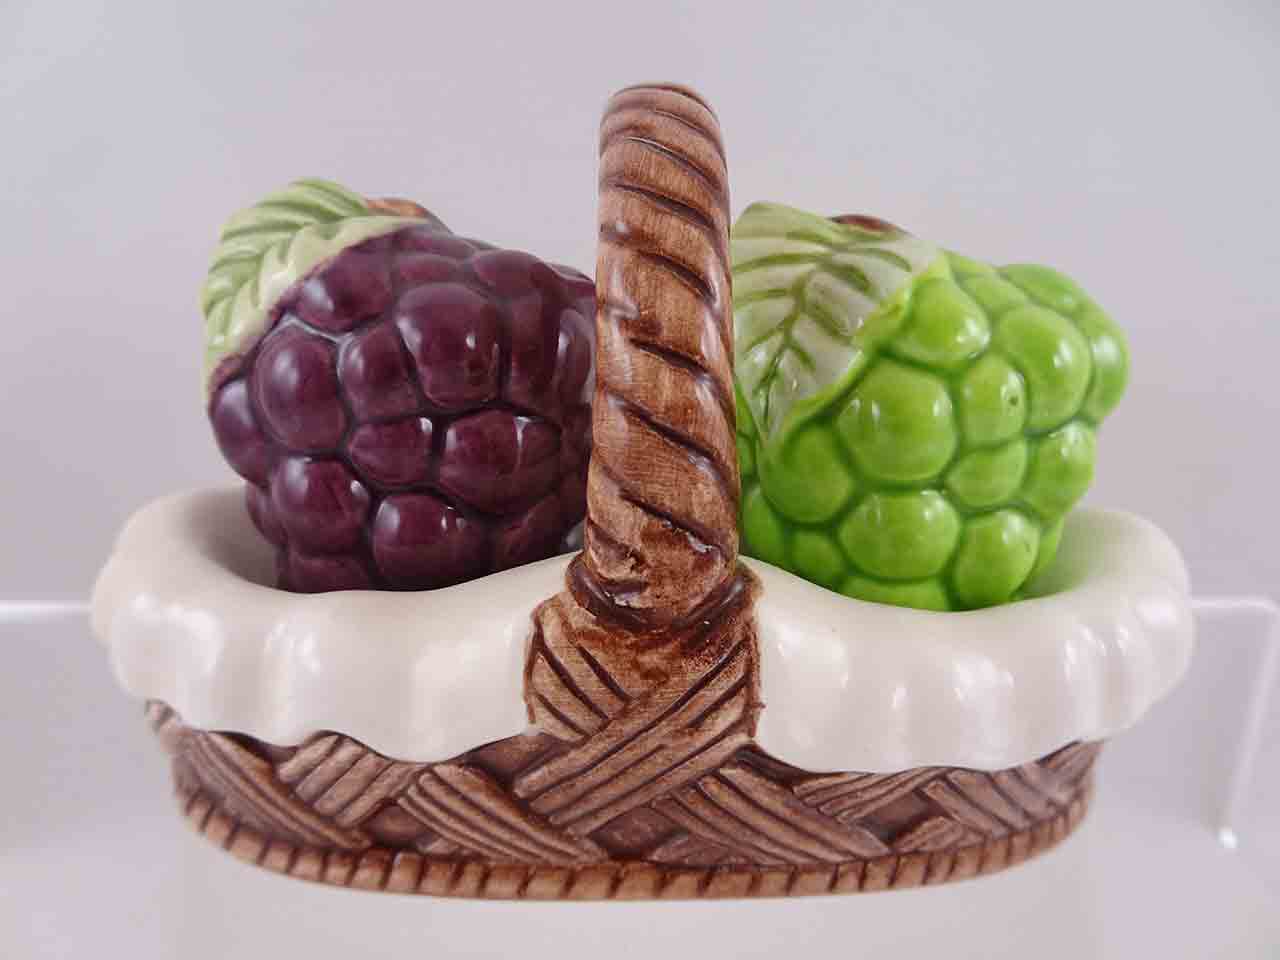 Fruit in ceramic baskets salt and pepper shakers - grapes